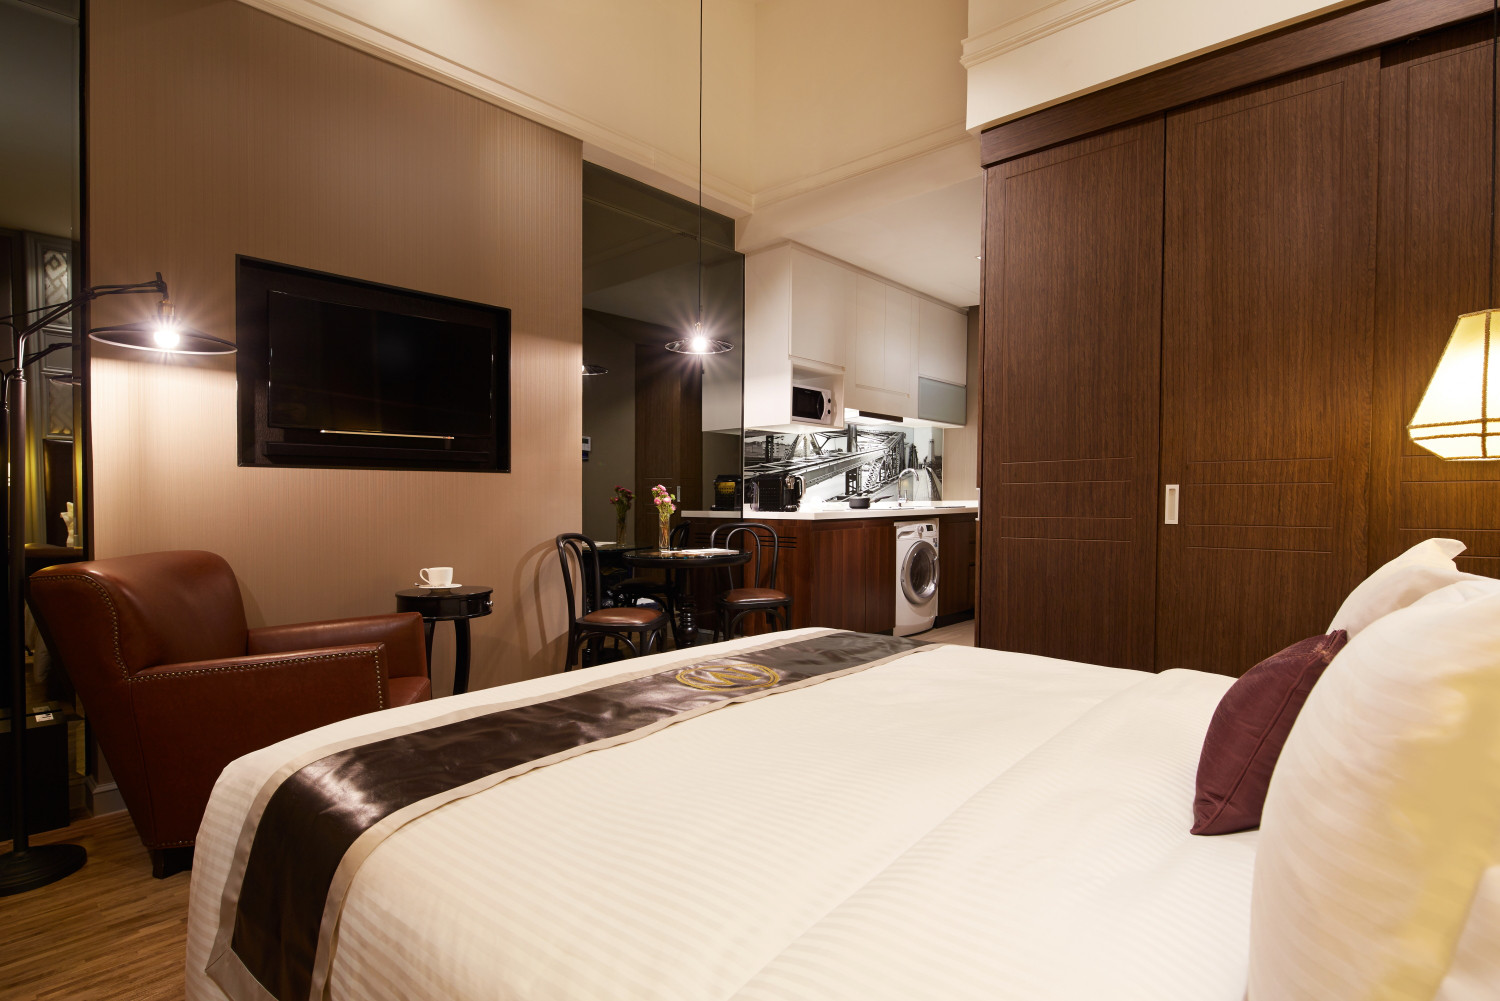 You are currently viewing Hotel interior photography suite room